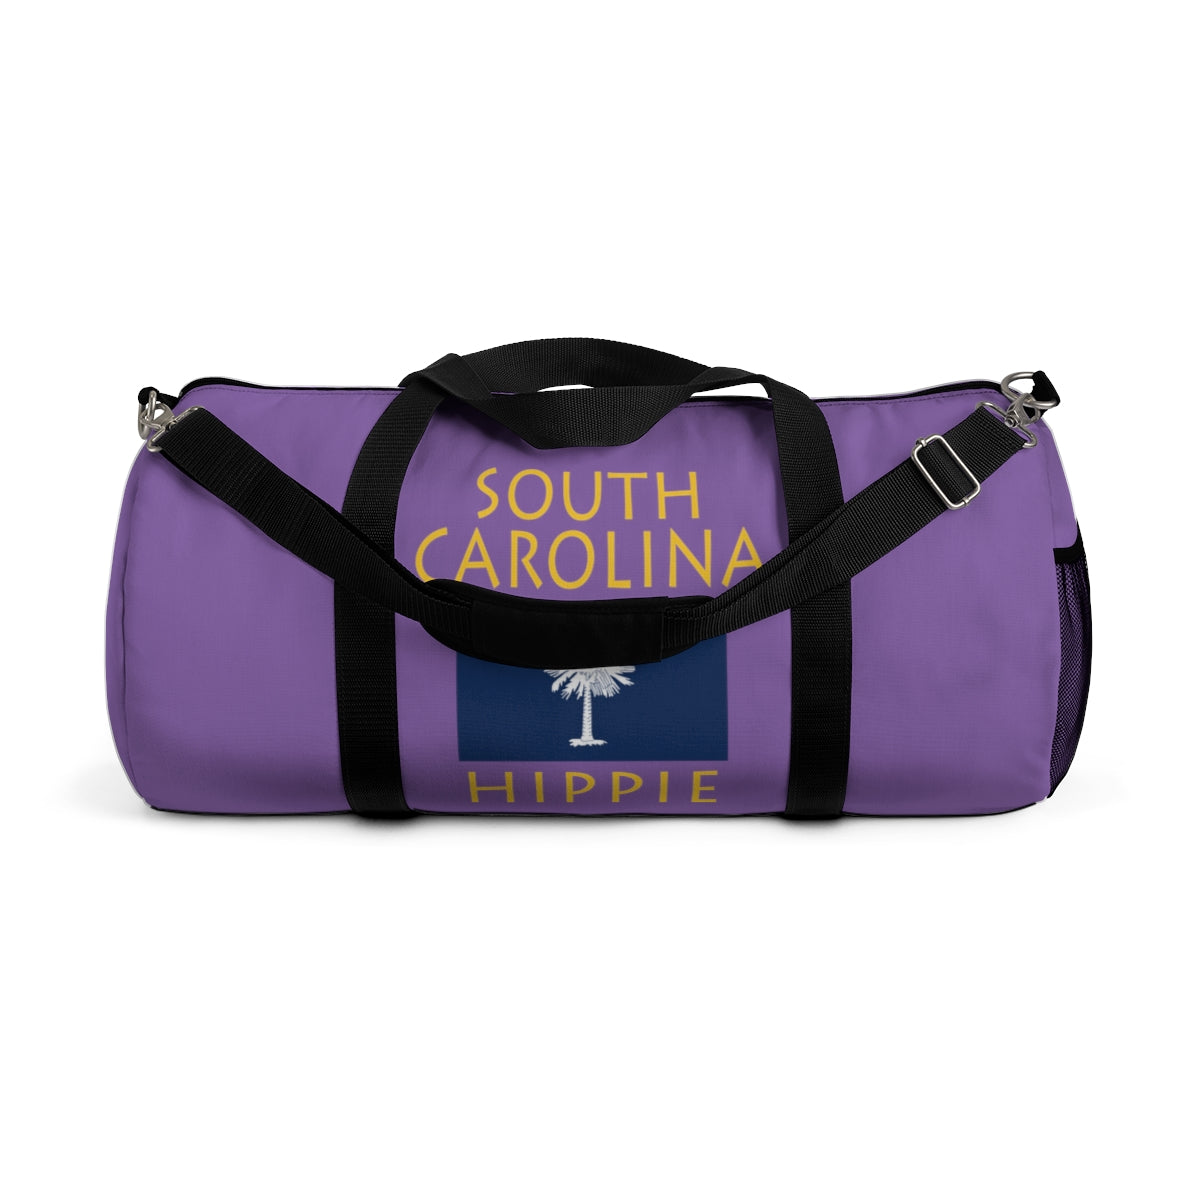   Stately Wear's South Carolina Flag Hippie duffel bag is colorful, iconic and stylish. We are a Katie Couric Shop partner. This duffel bag is the perfect accessory as a beach bag, ski bag, travel bag, shopping bag & gym bag, Pilates bag or yoga bag. Custom made one-at-a-time with environmentally friendly biodegradable inks & dyes. 2 sizes to choose. Stately Wear's bags are very durable, soft and colorful duffels with durable straps.